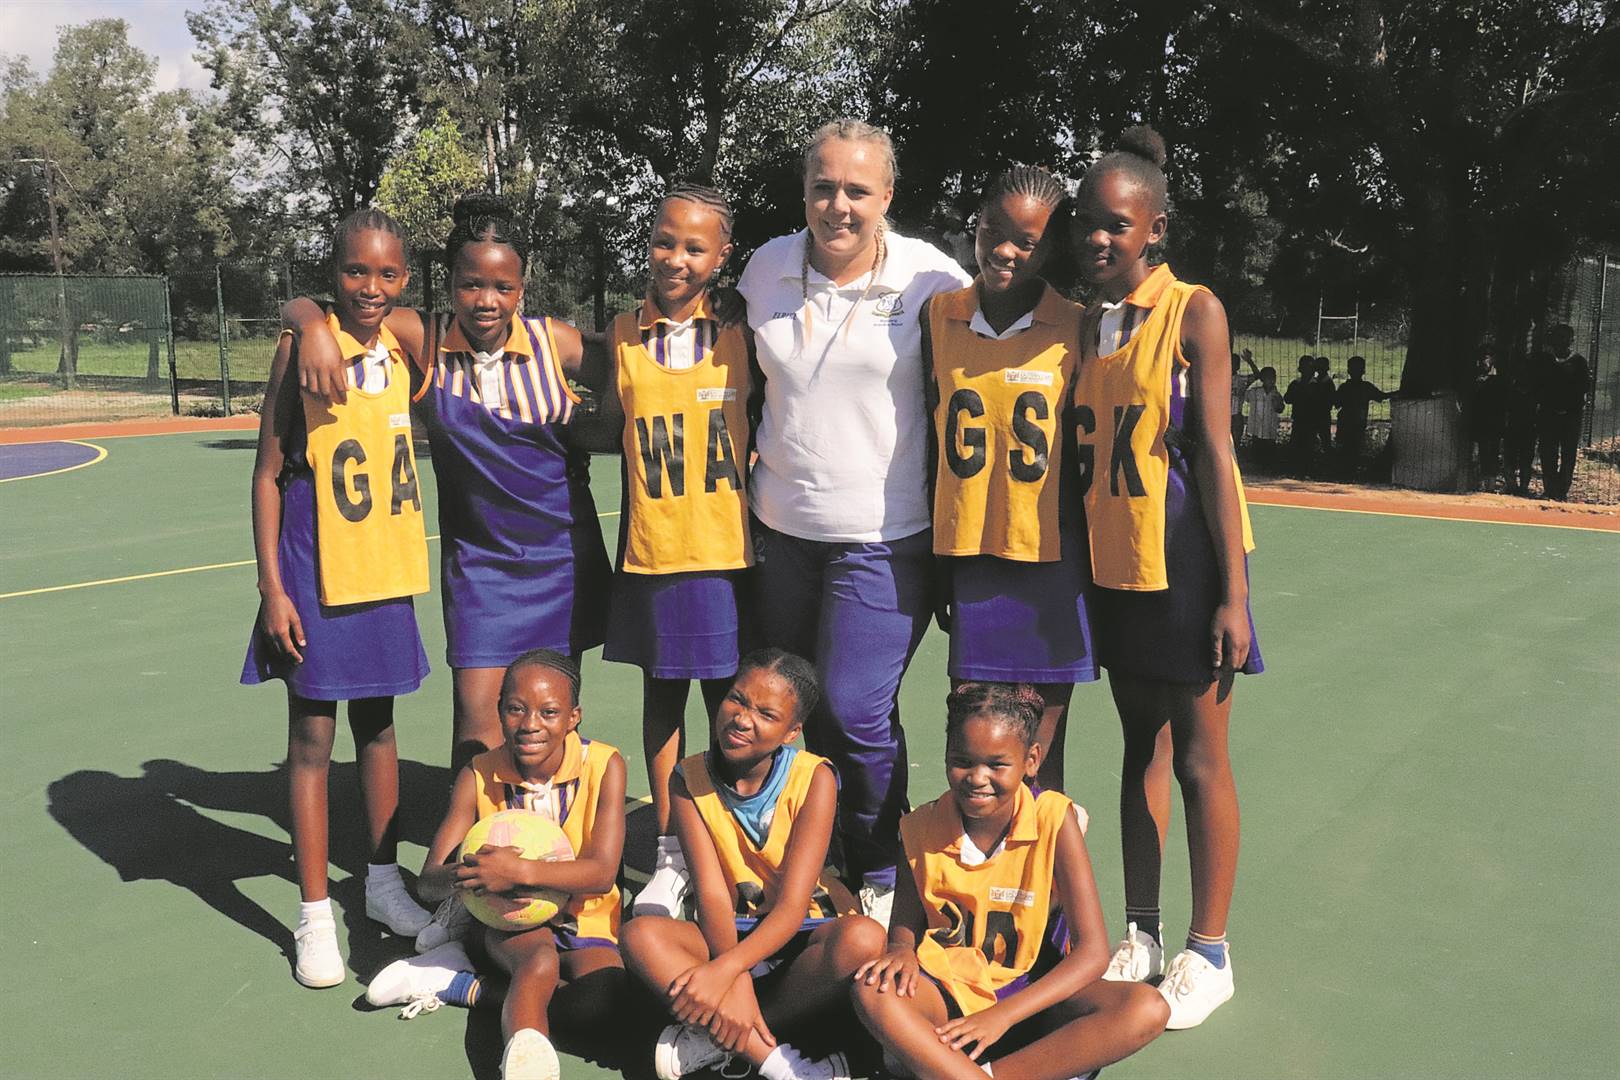 The Rietberg Primary School netball team christen their newly-built court. At the back from left areDiline Milla, Sinesipho Vusani, Kelly-Kelly Swarts, Elrike Bosman (coach), Basilina Isaacs and Ayamthanda Malgas. In front are Sinawo Mqekelana, Charlize Baartman and Lunathi Ngxizela. 